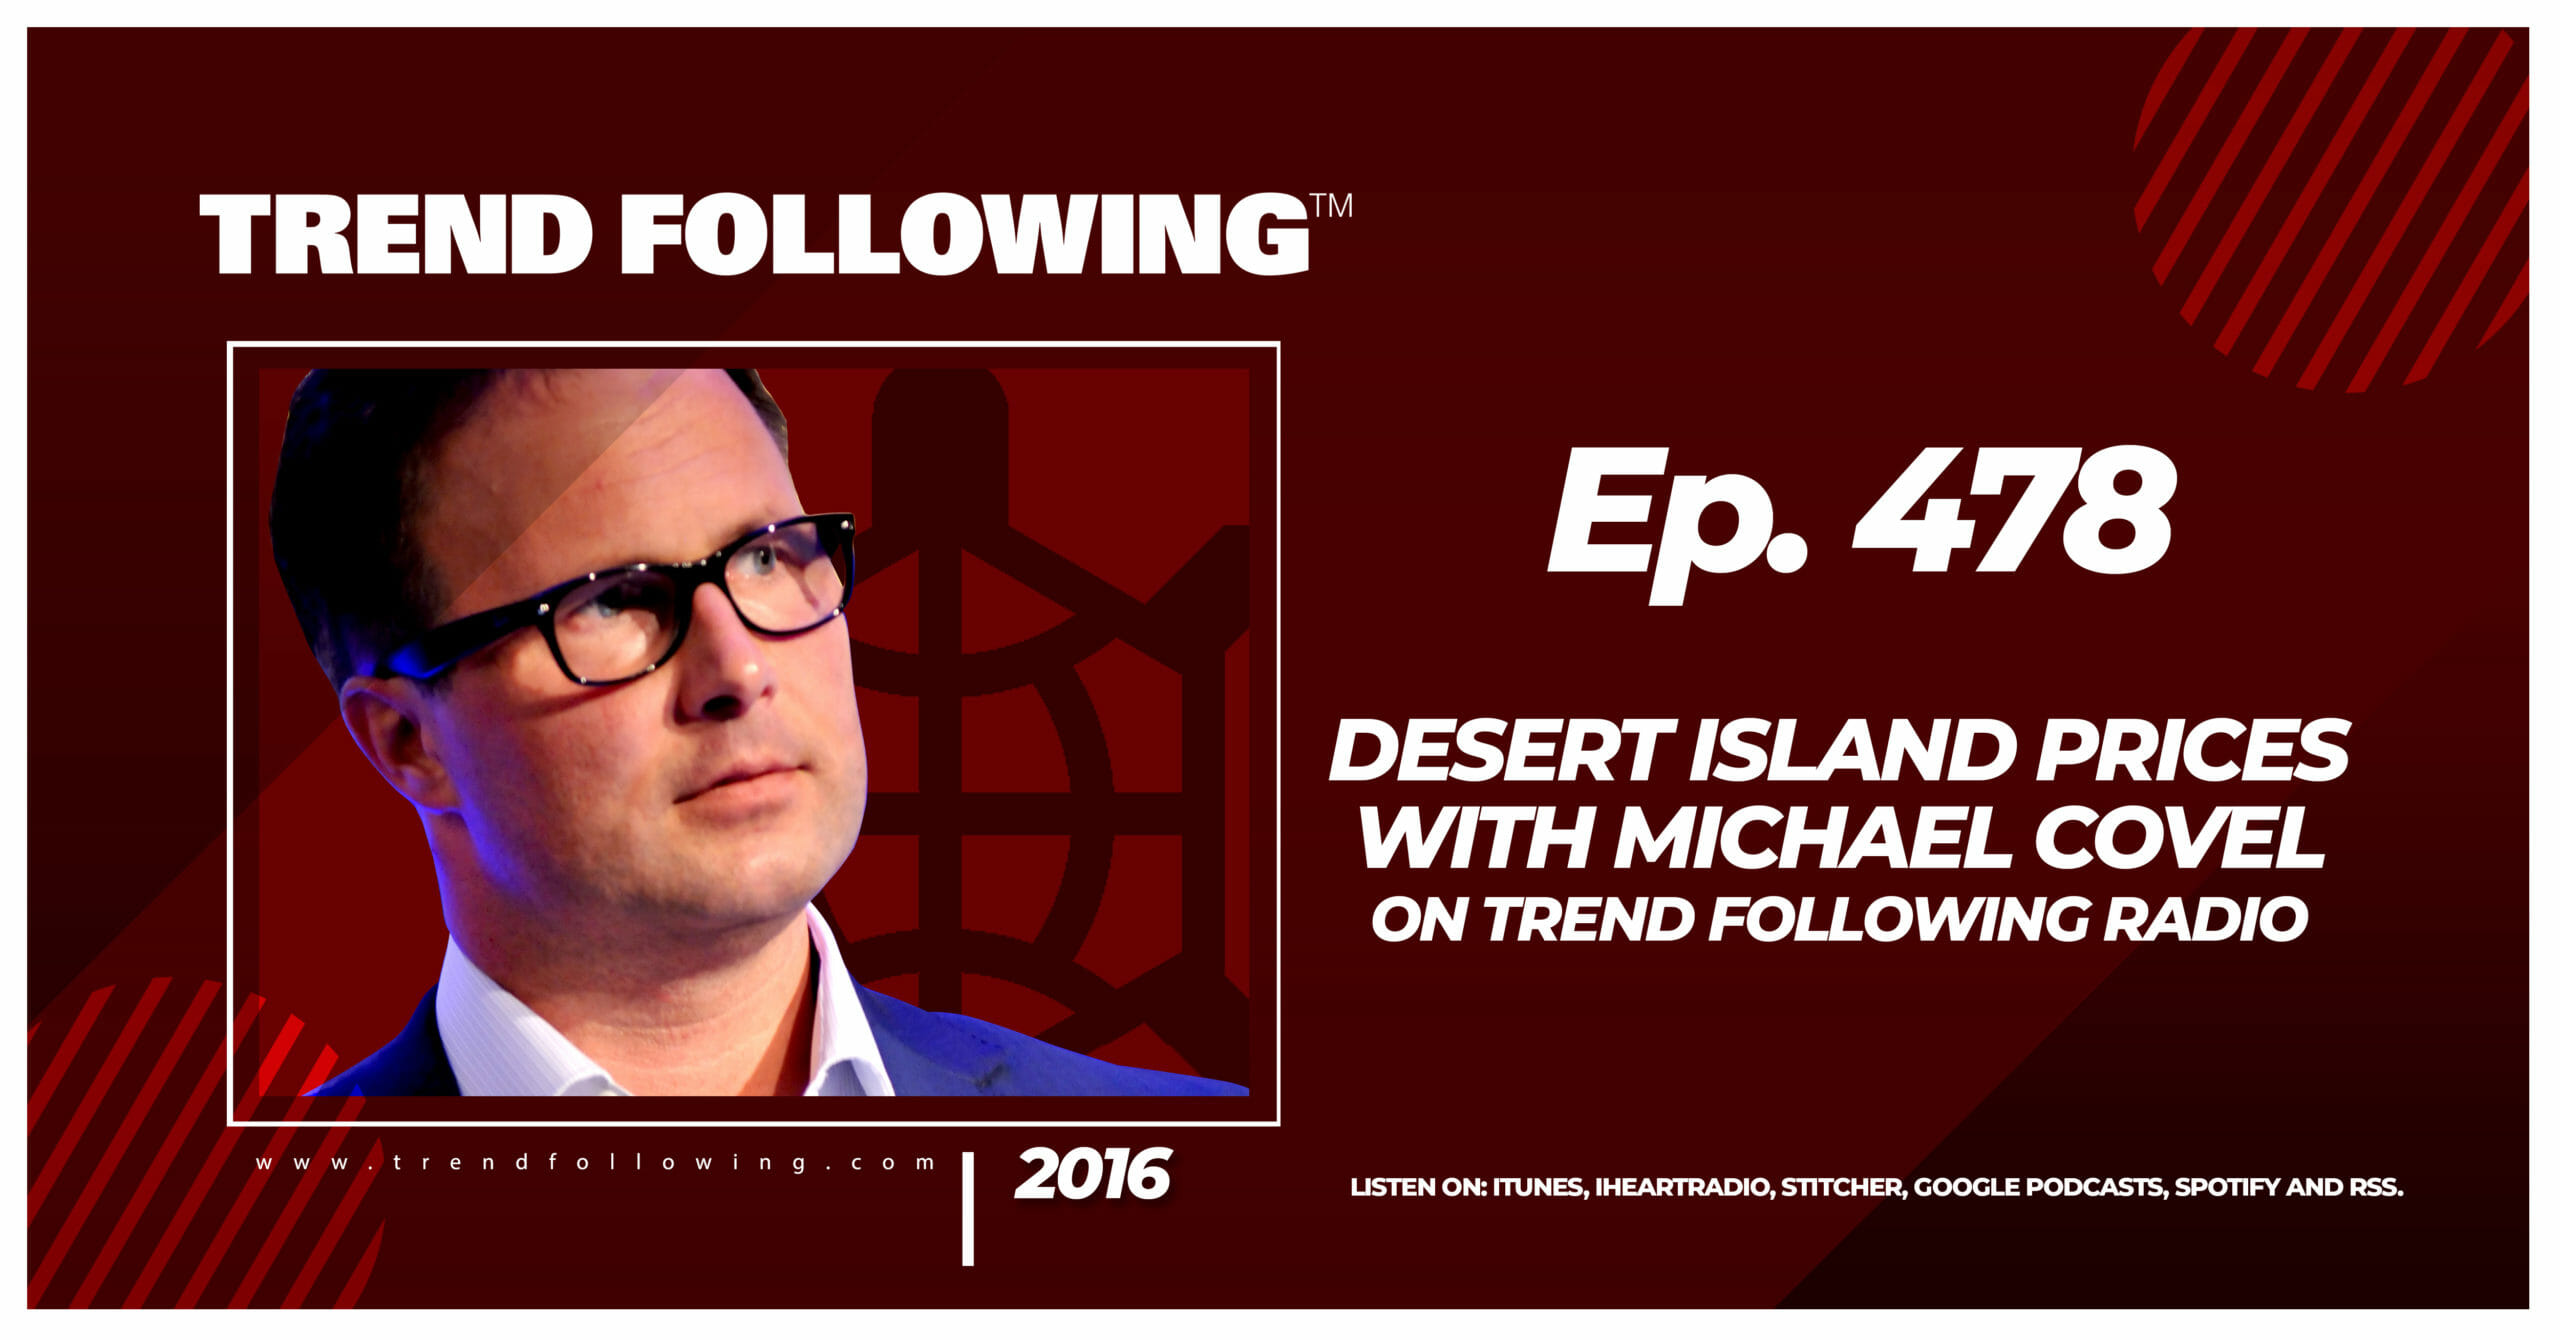 Desert Island Prices with Michael Covel on Trend Following Radio